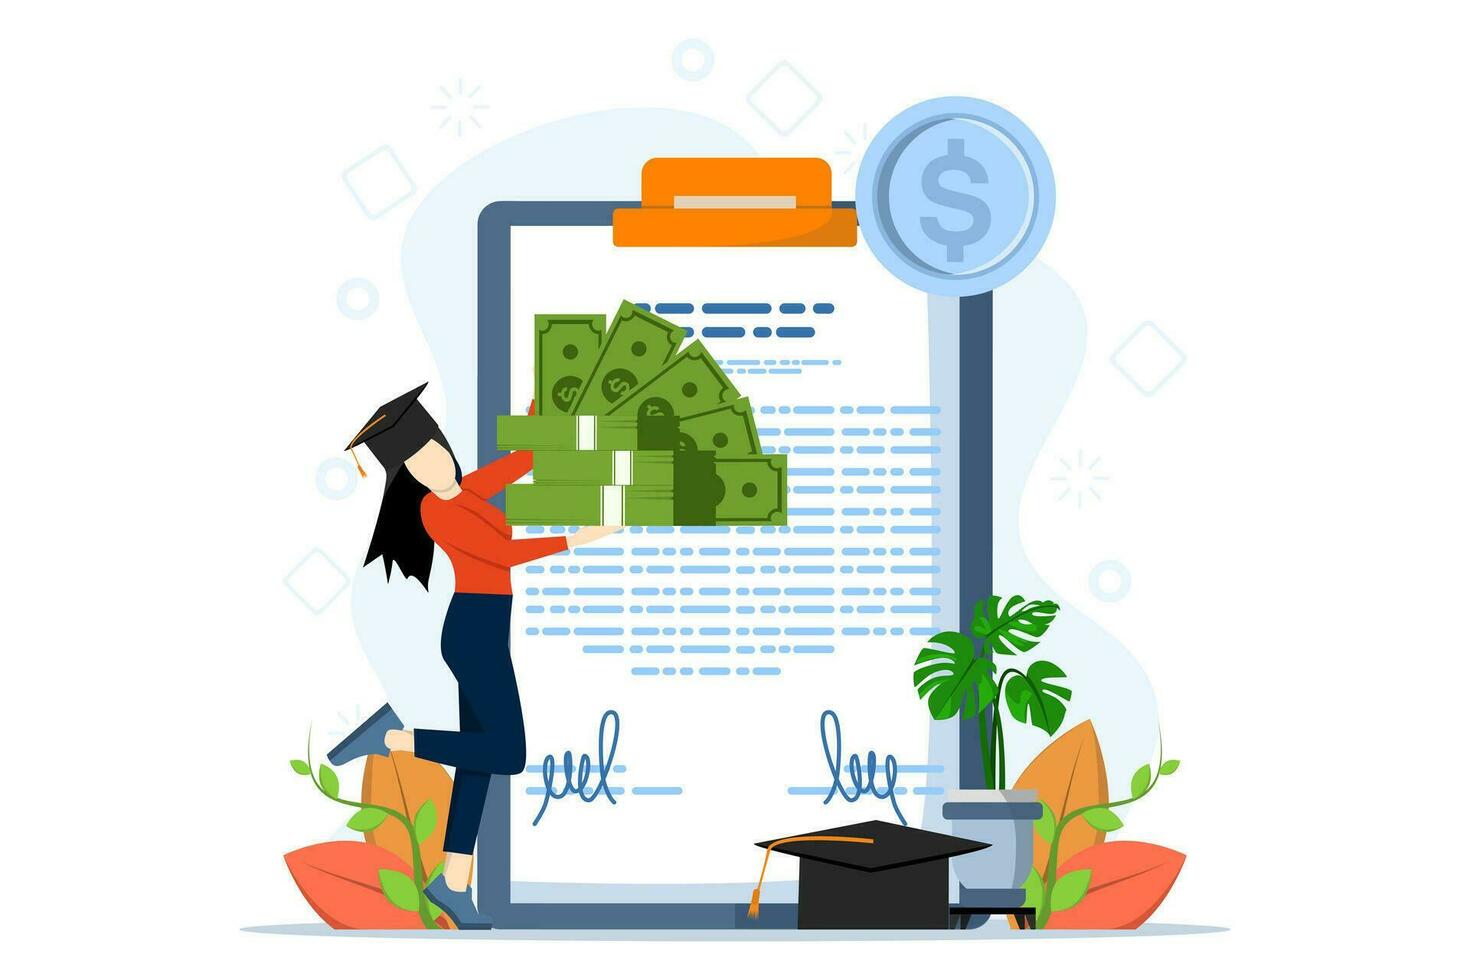 Education loan concept. Student character invests money in education, takes out student loans. Concept of university and tuition fees. Flat vector illustration on white background.